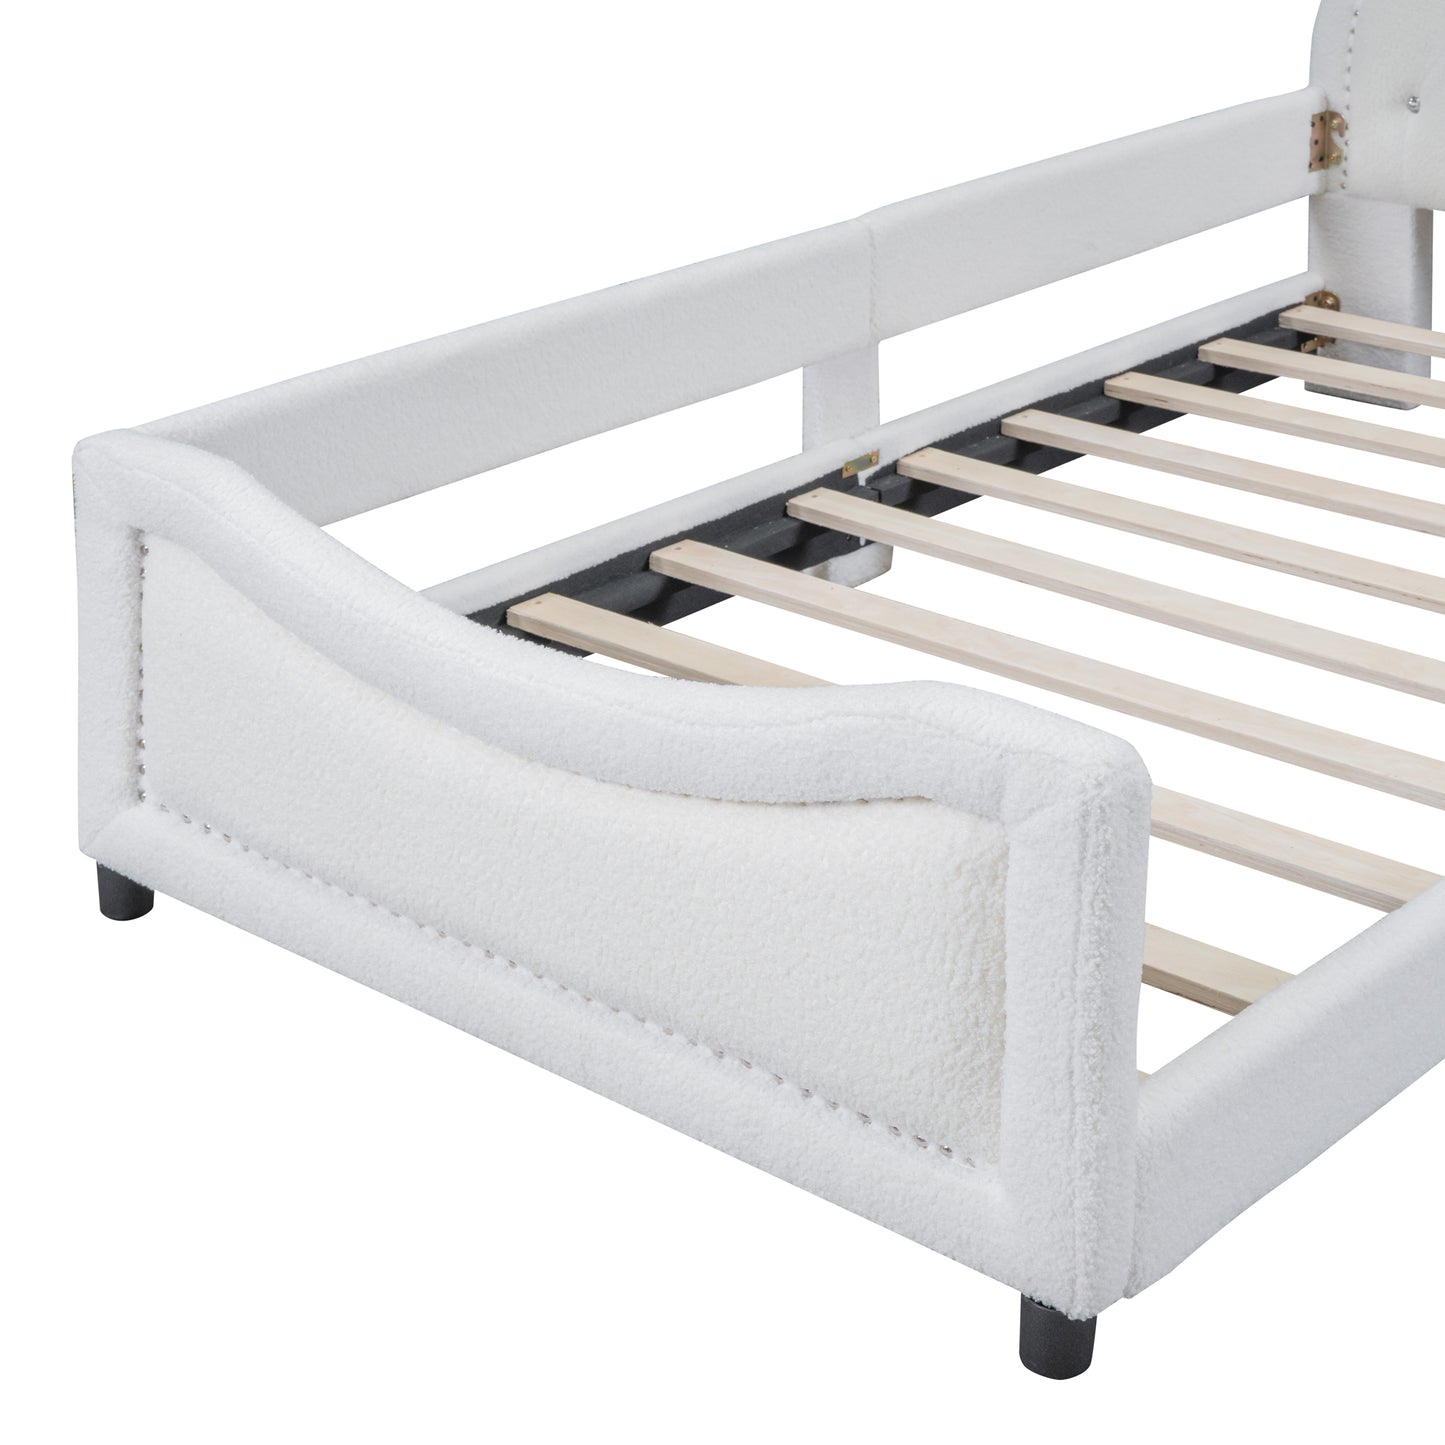 Teddy Fleece Twin Size Upholstered Daybed with OX Horn Shaped Headboard, White